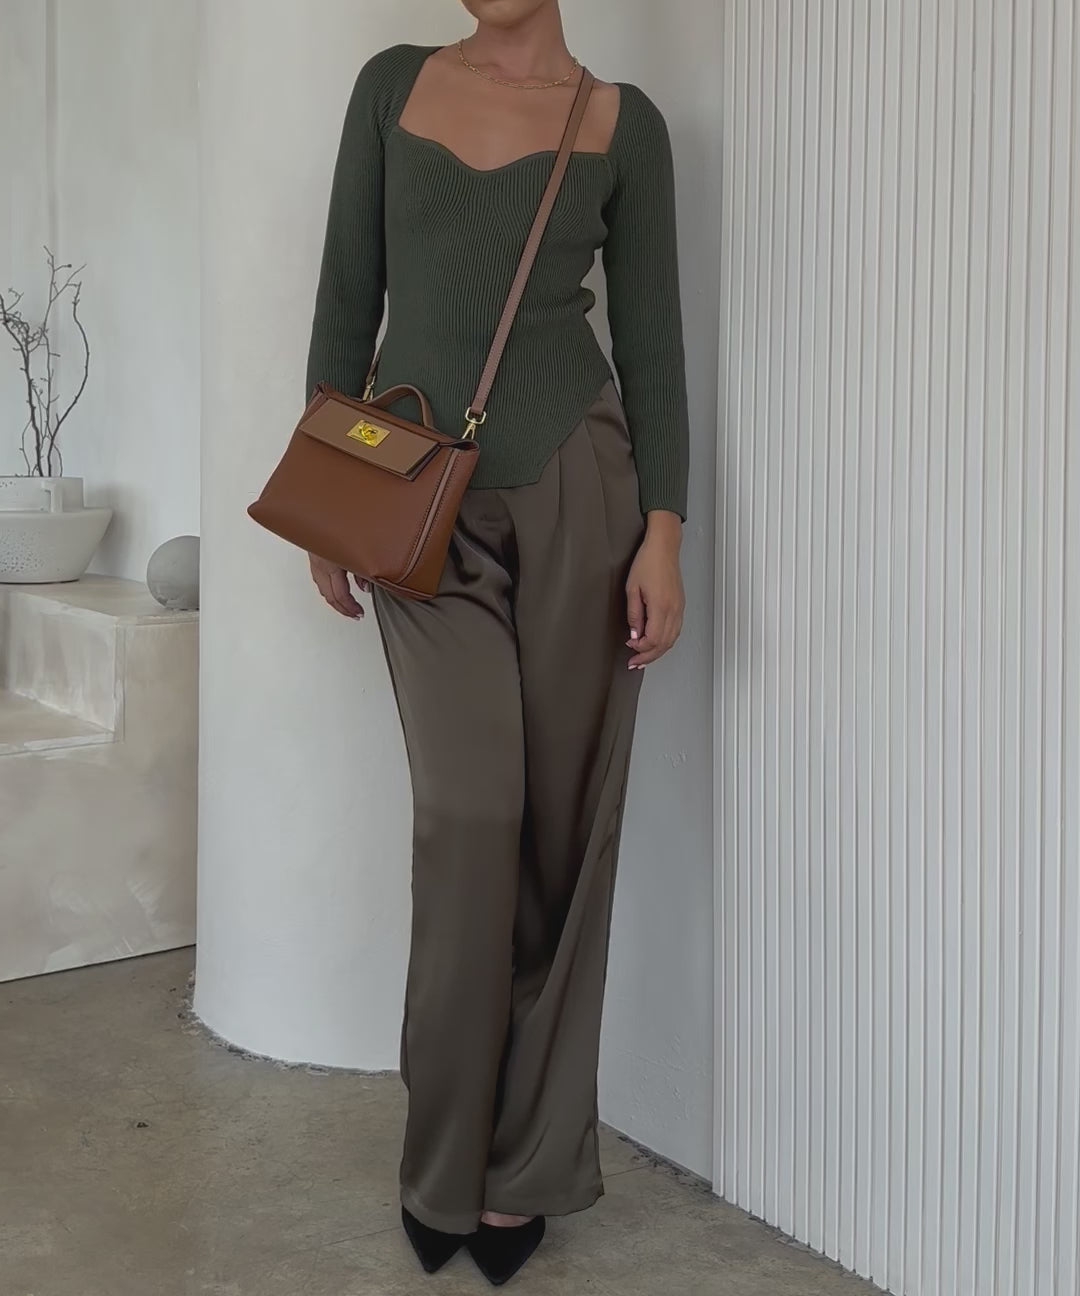 Video of a model wearing a saddle medium vegan leather crossbody bag against a white wall. 